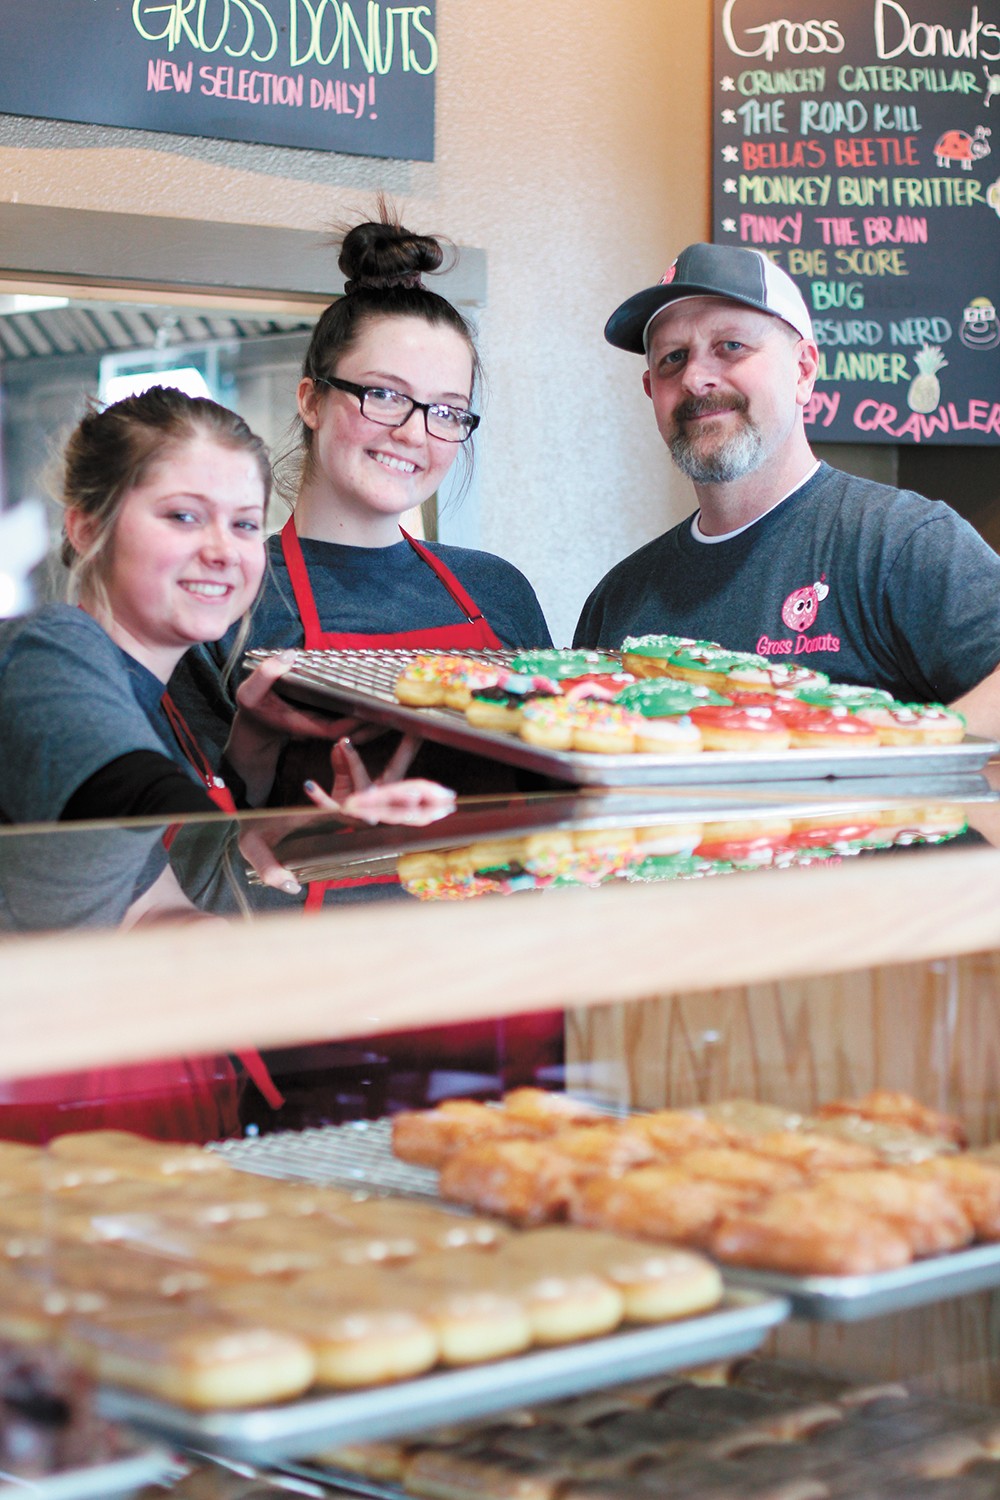 North Idaho's Best Donuts: Gross Donuts